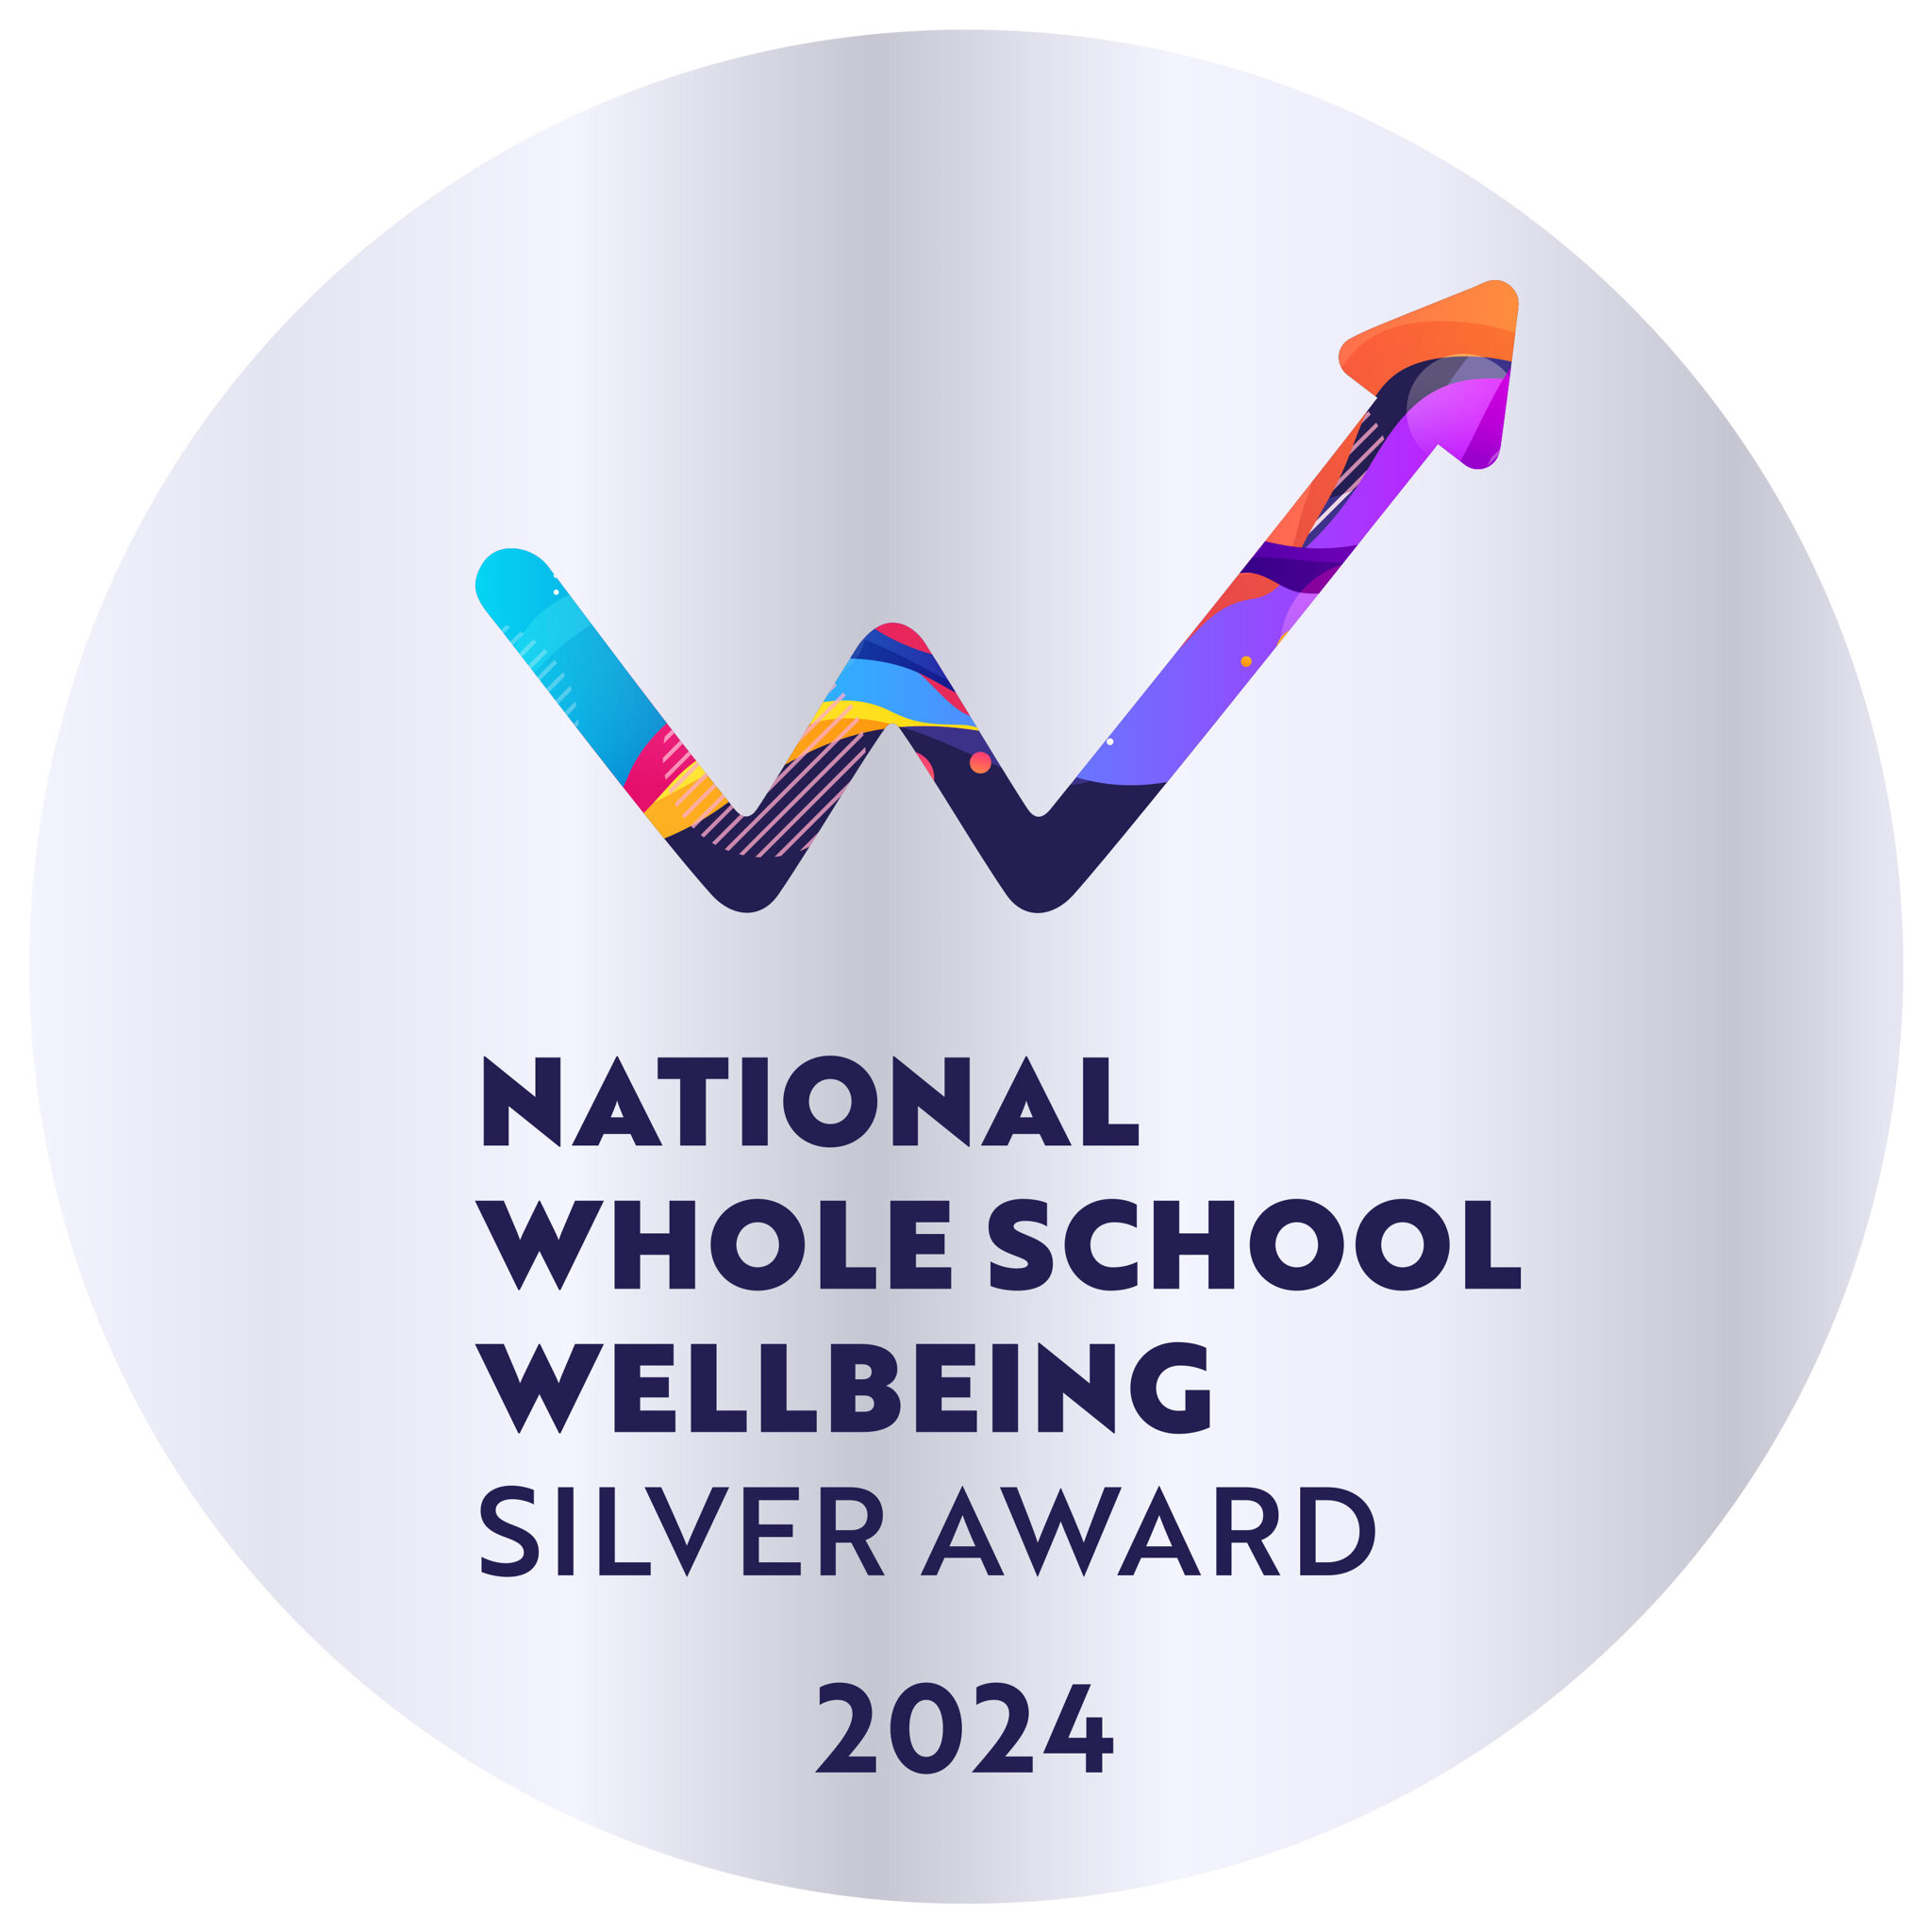 Wellbeing Silver